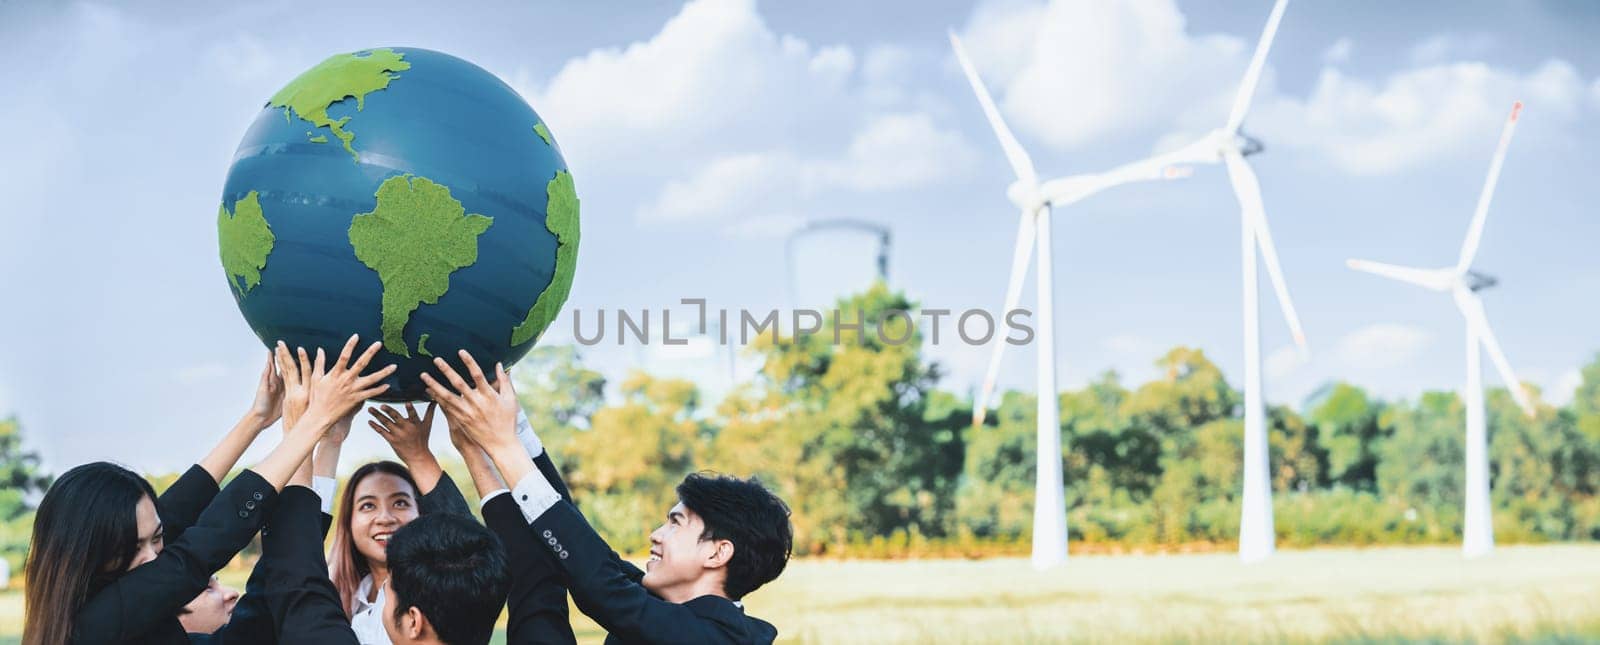 Earth day concept with big Earth globe held by asian business people team promoting environmental awareness using clean sustainable and renewable energy with wind turbine for greener future. Gyre